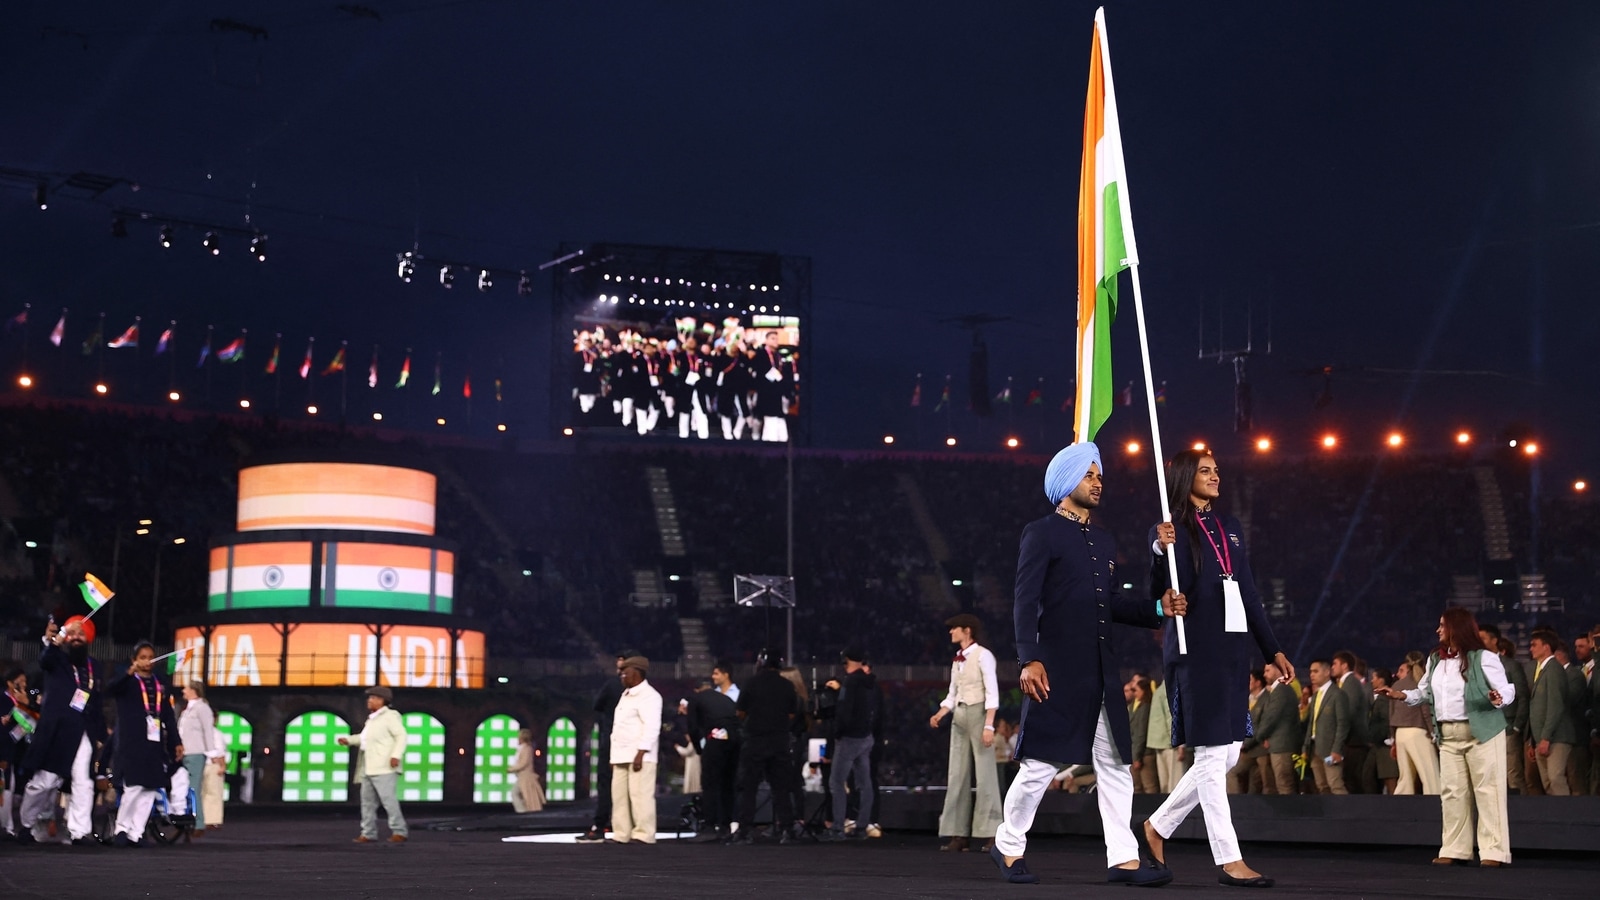 Commonwealth Games 2022 Highlights 22nd CWG declared open, Sindhu, Manpreet lead India out in dazzling opening ceremony Hindustan Times